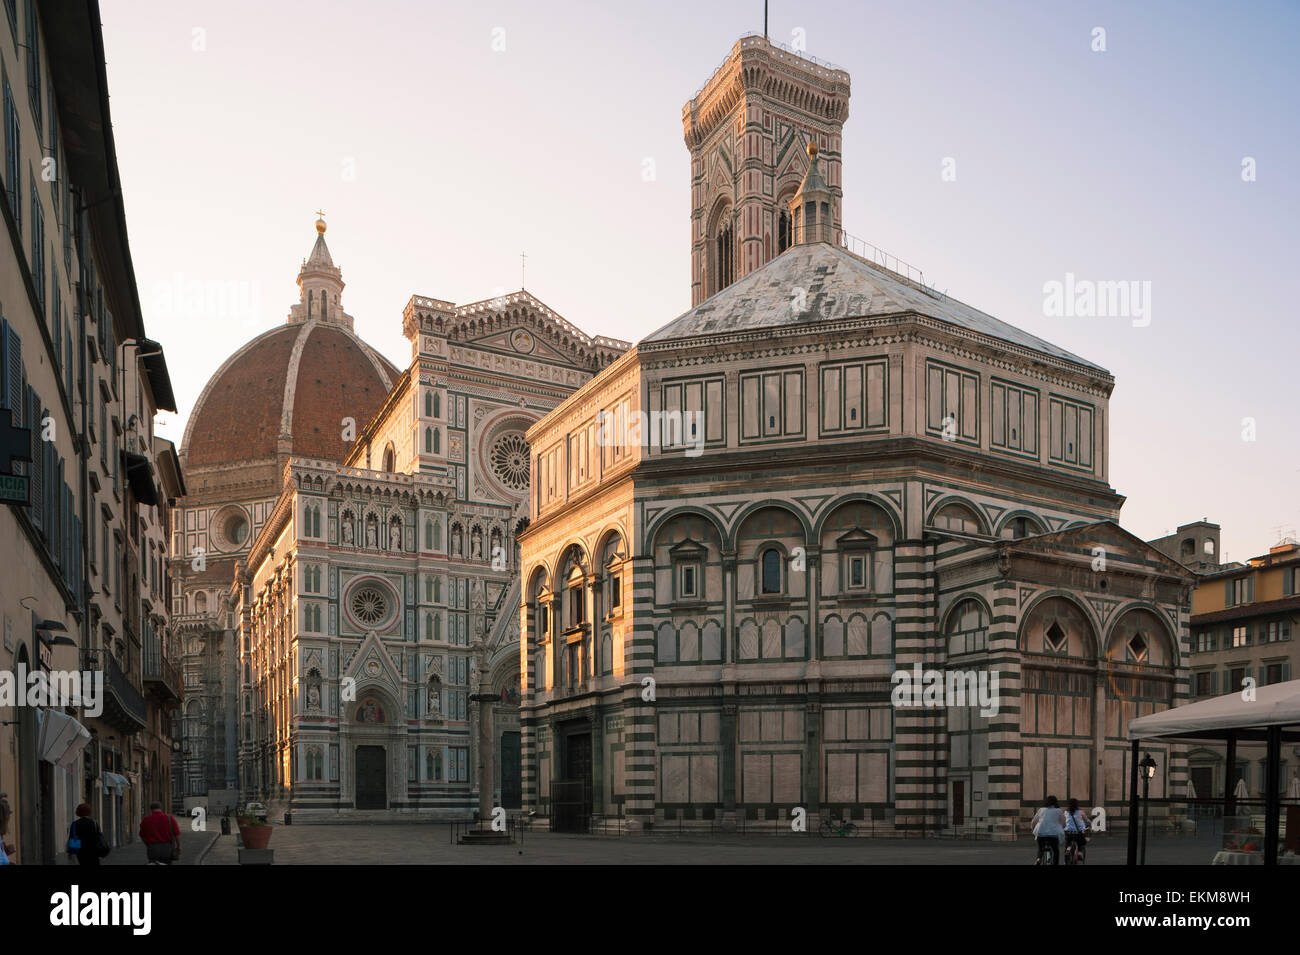 Italy cathedral, view at sunrise of the Duomo and (foreground) Baptistry building in the Piazza San Giovanni, Florence, Italy. Stock Photo